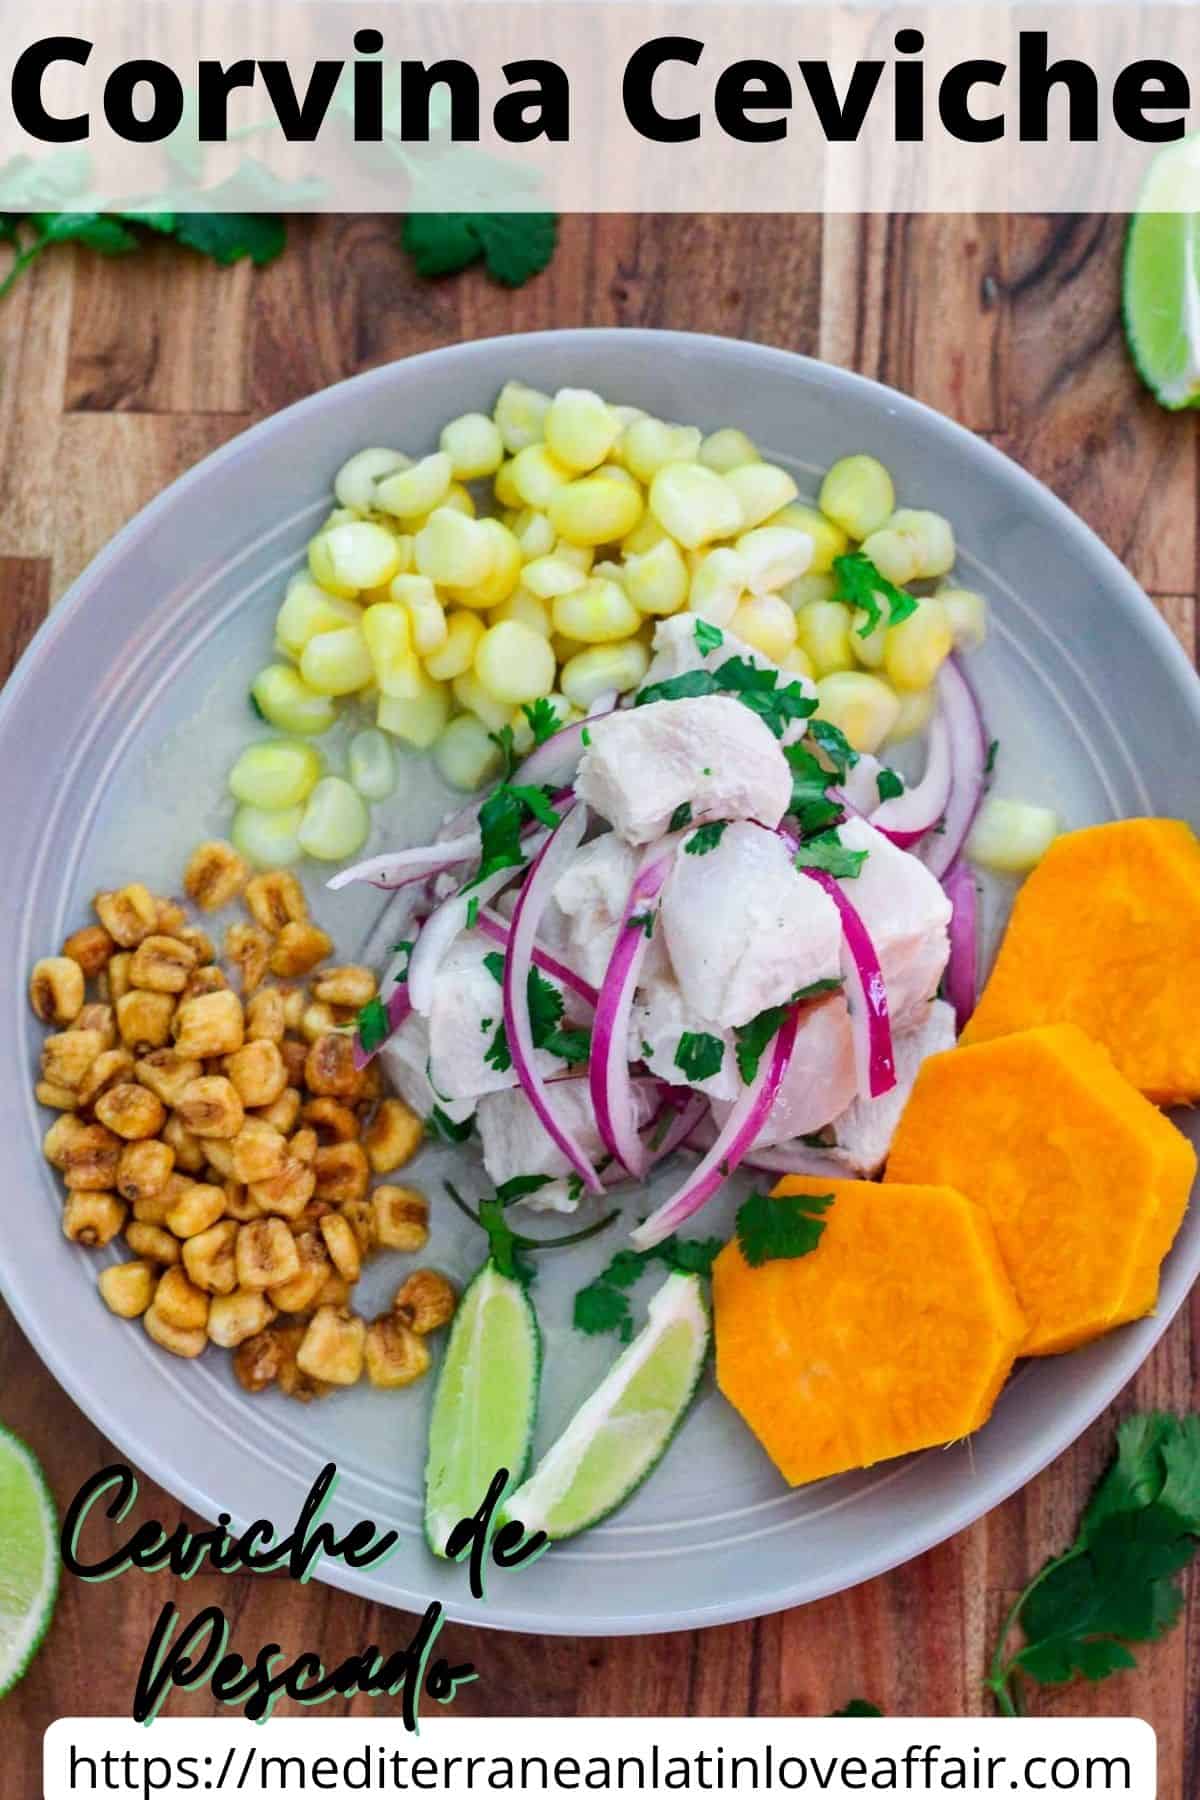 An image prepared for Pinterest. It shows corvina ceviche in a plate with two different types of corn and sweet potato, garnished with onions, cilantro and lime.